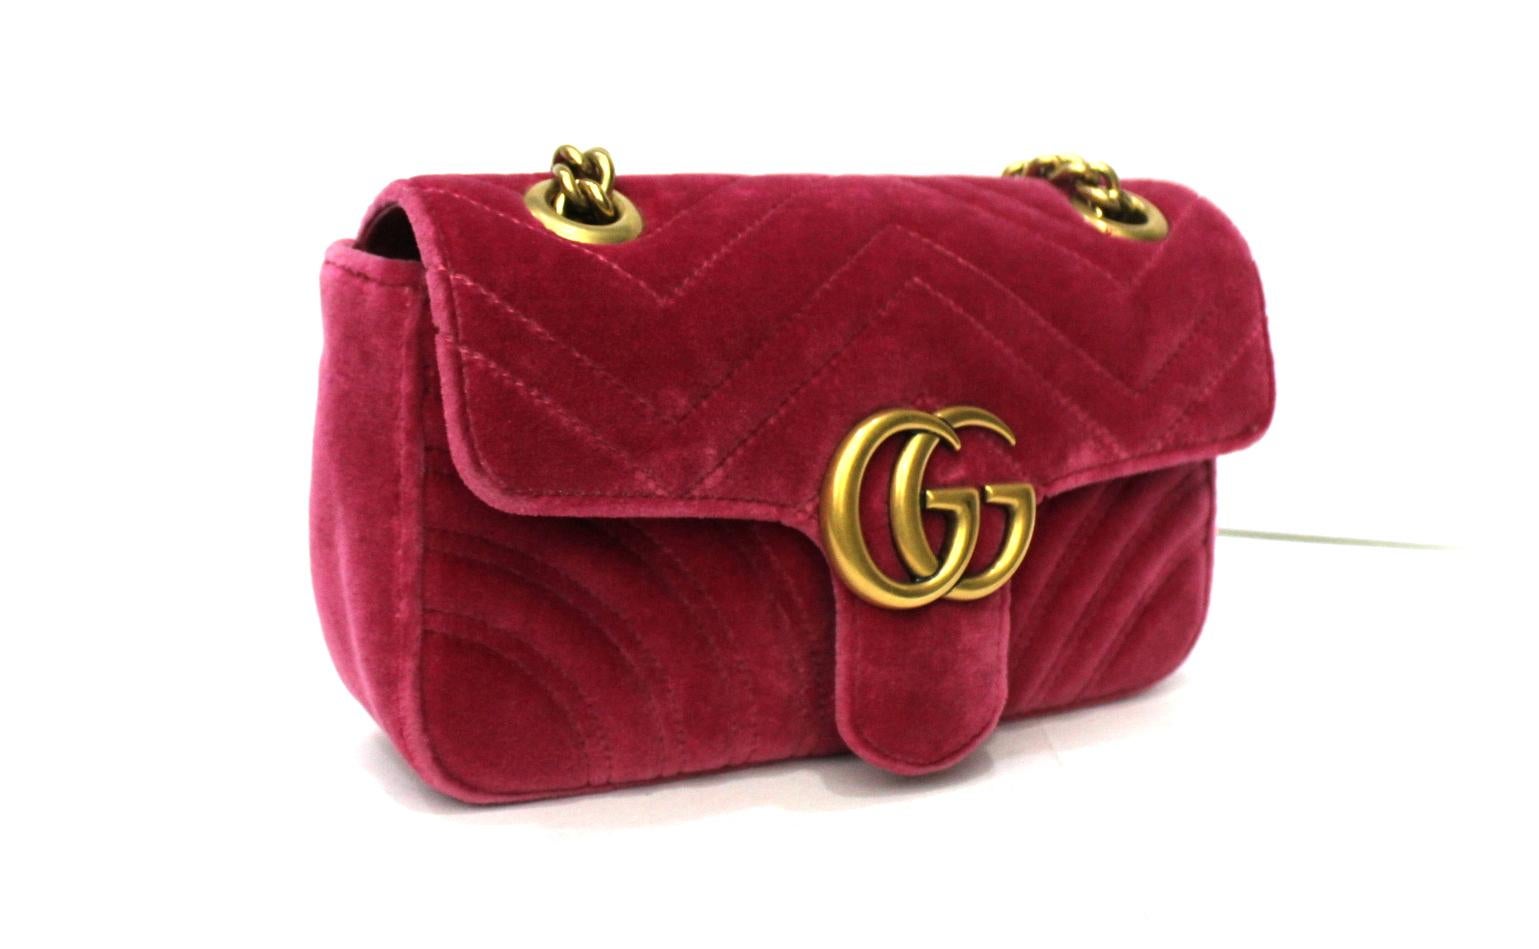 Gucci bag Marmont line measures 22 cm made of fuchsia velvet.
Gilded hardware, equipped with leather handle and adjustable chain.
Closure with classic GG logo, internally quite large. The bag is in excellent condition.